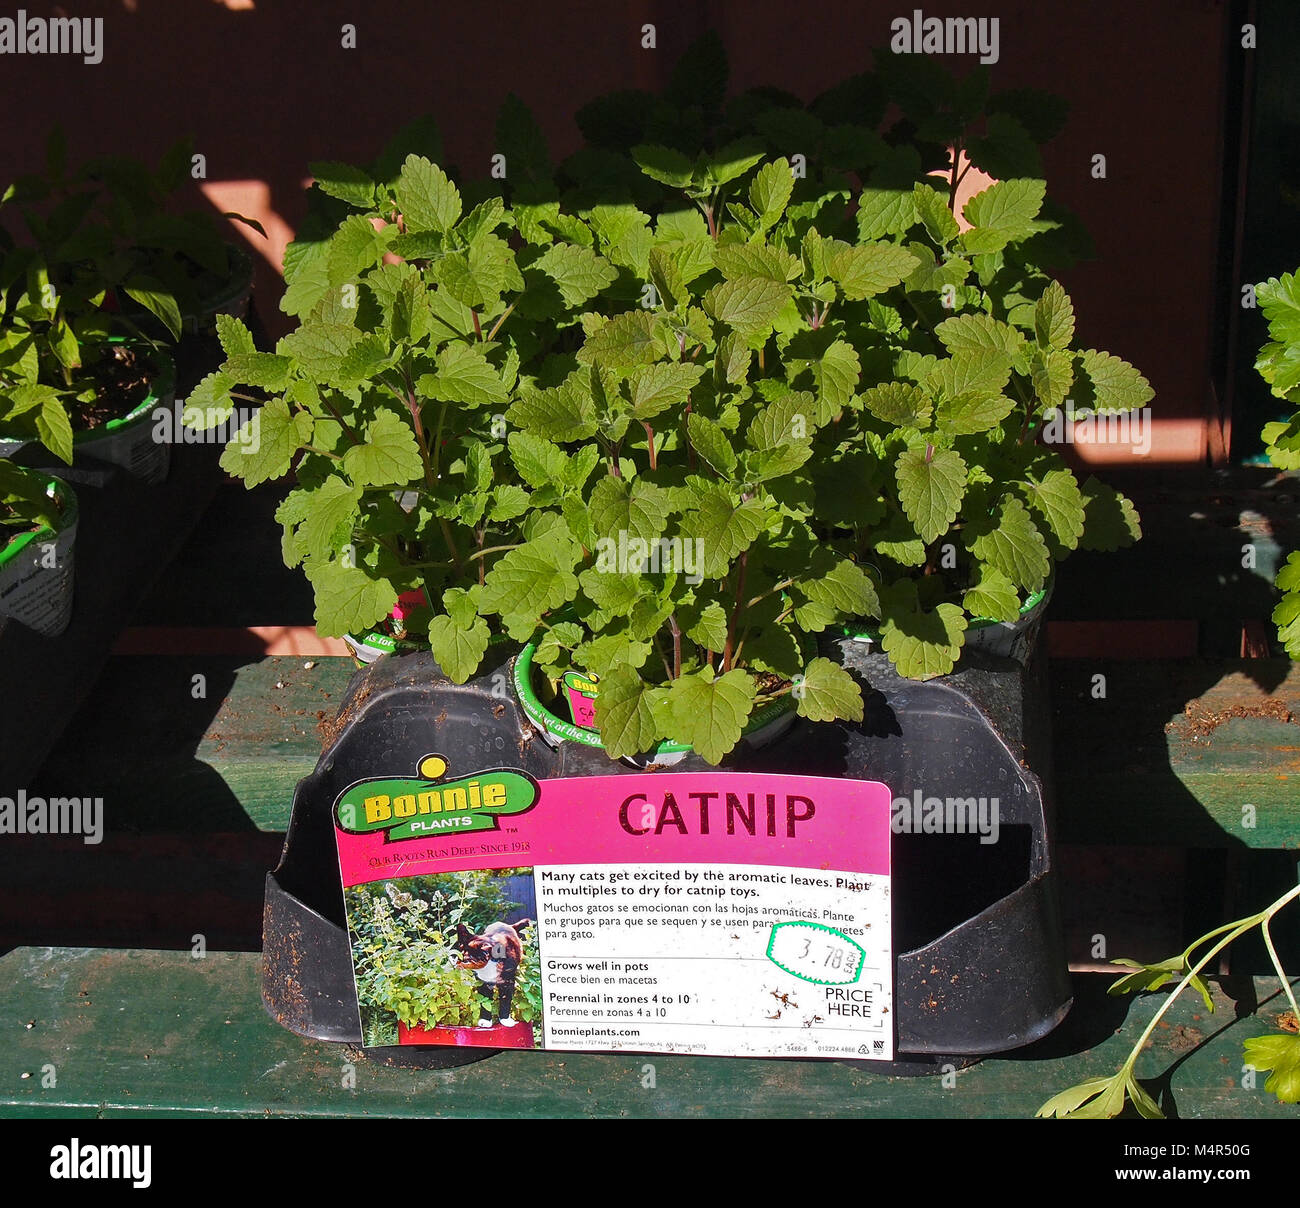 Catnip for sale at Home Depot Store, California, USA, Stock Photo